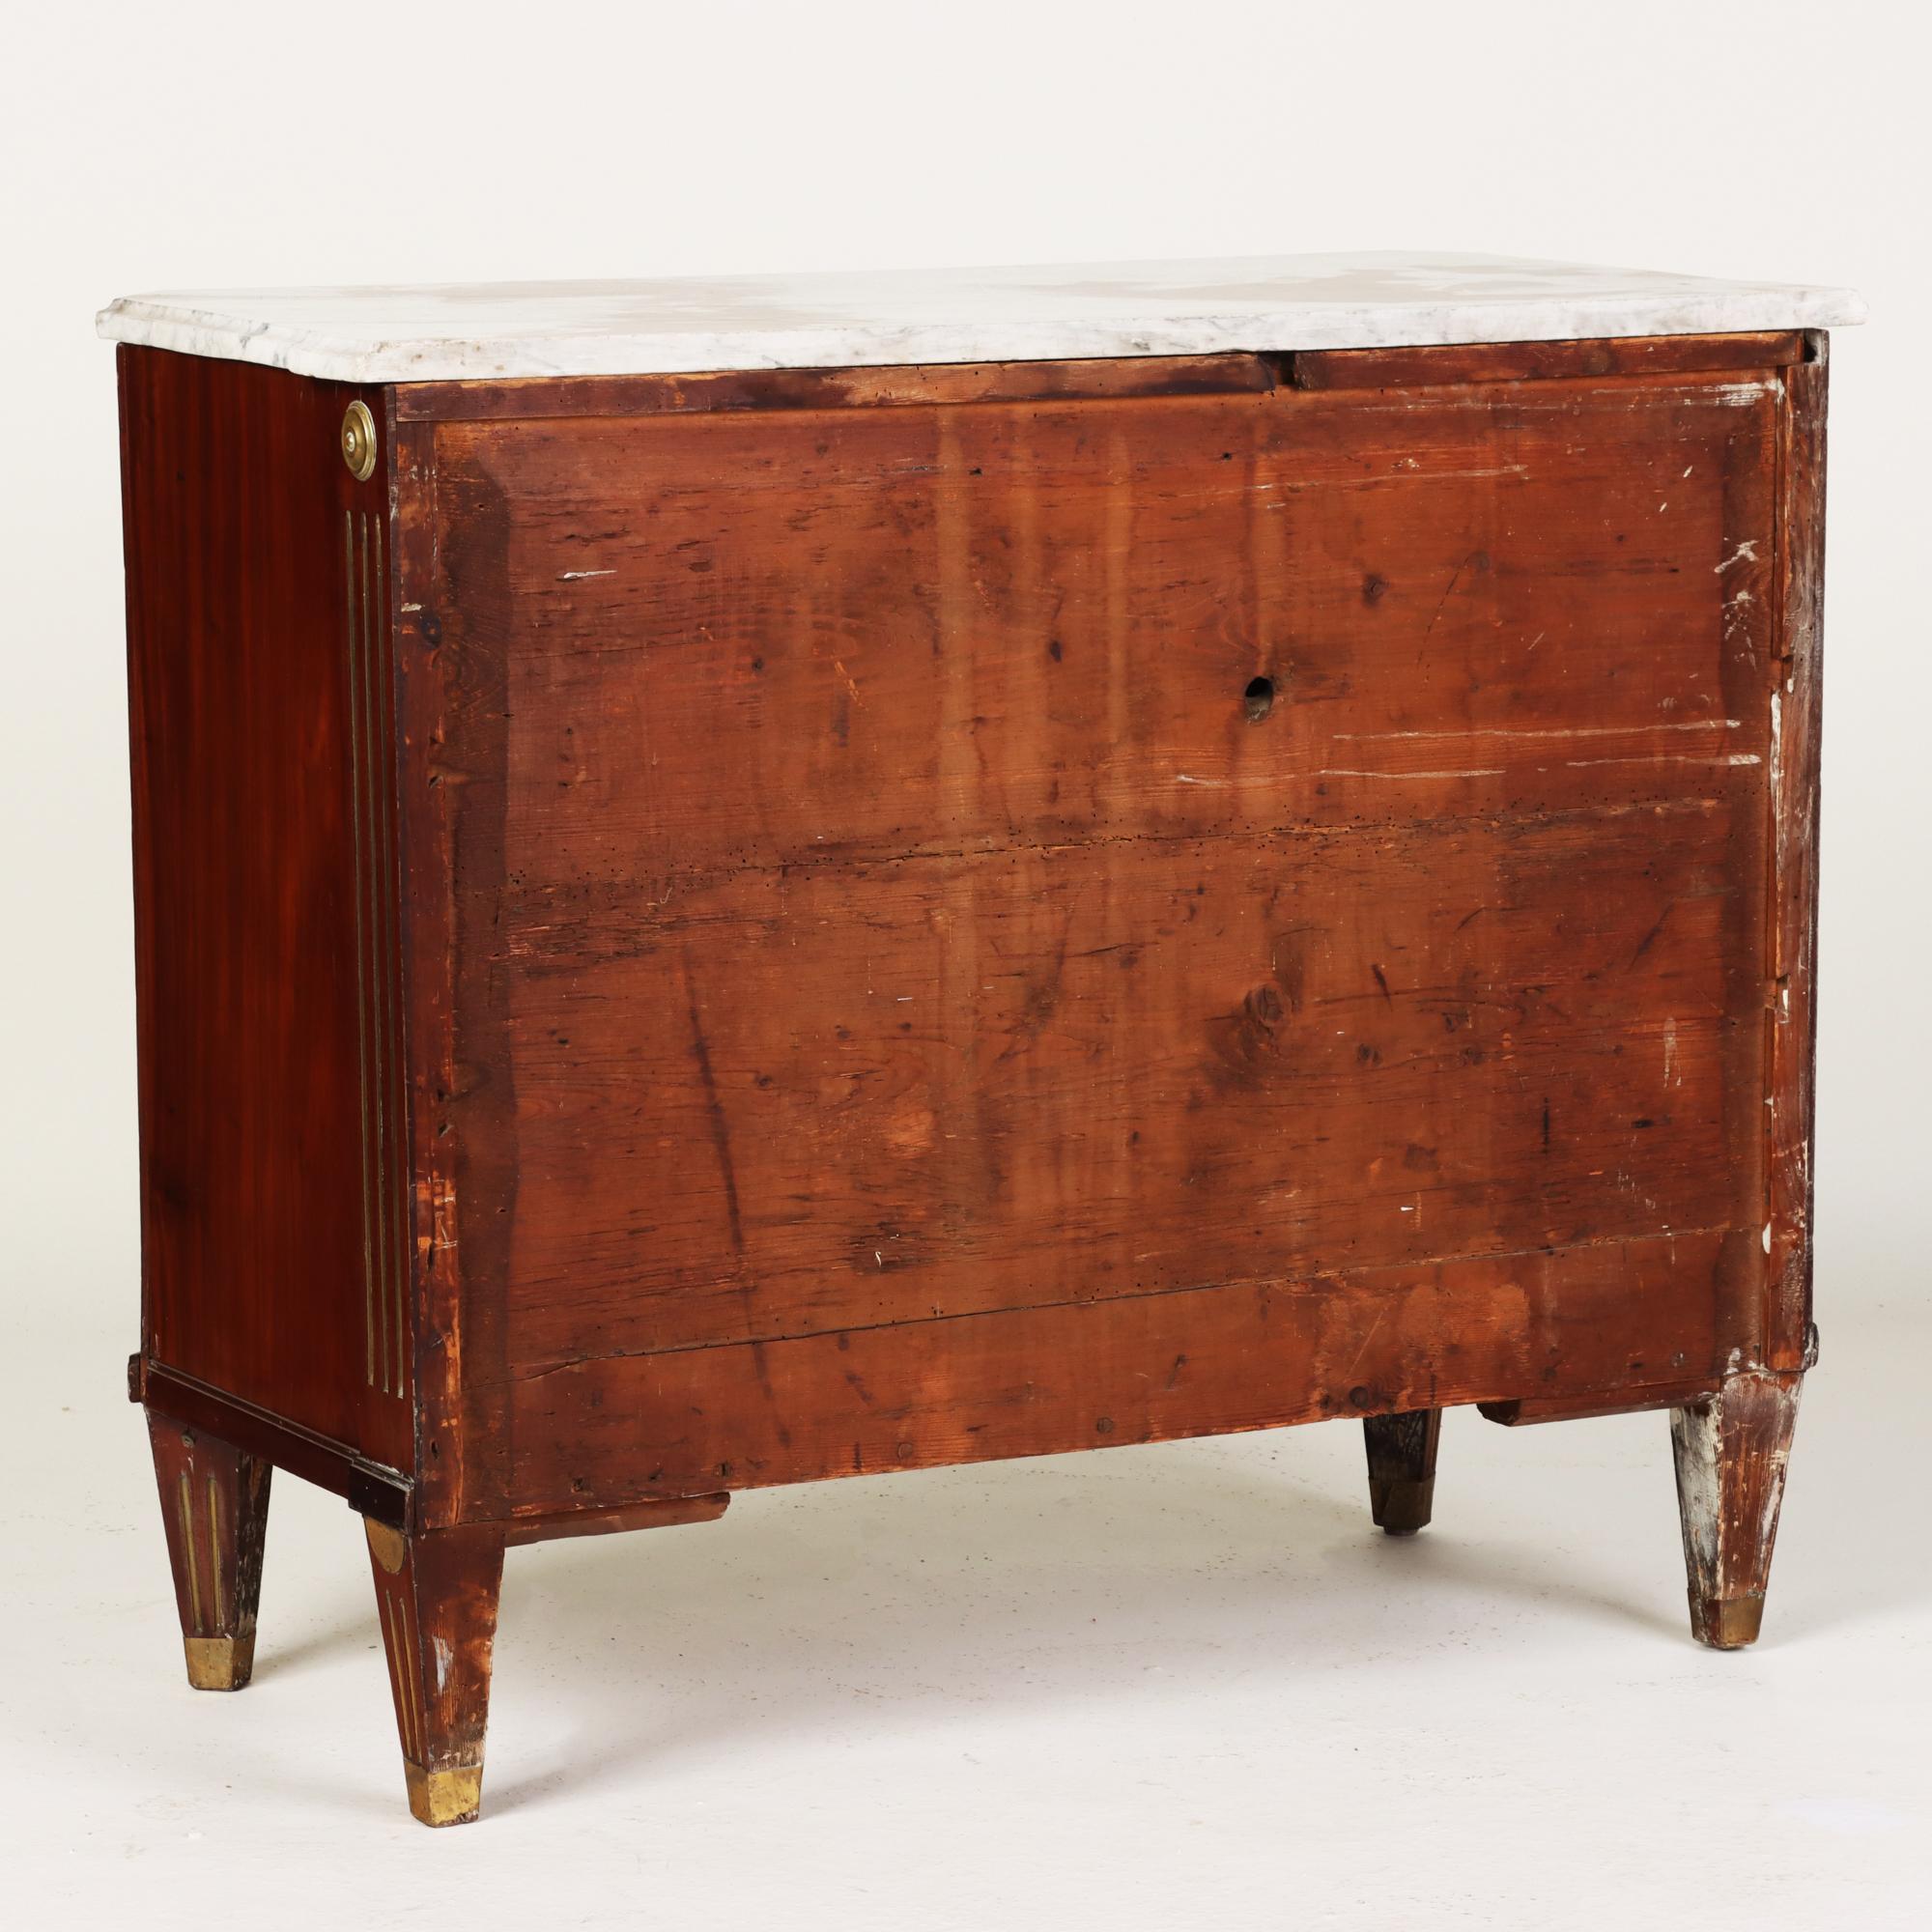 19th Century Russian Neoclassical Brass Mounted Mahogany Commode, Early Nineteenth Century